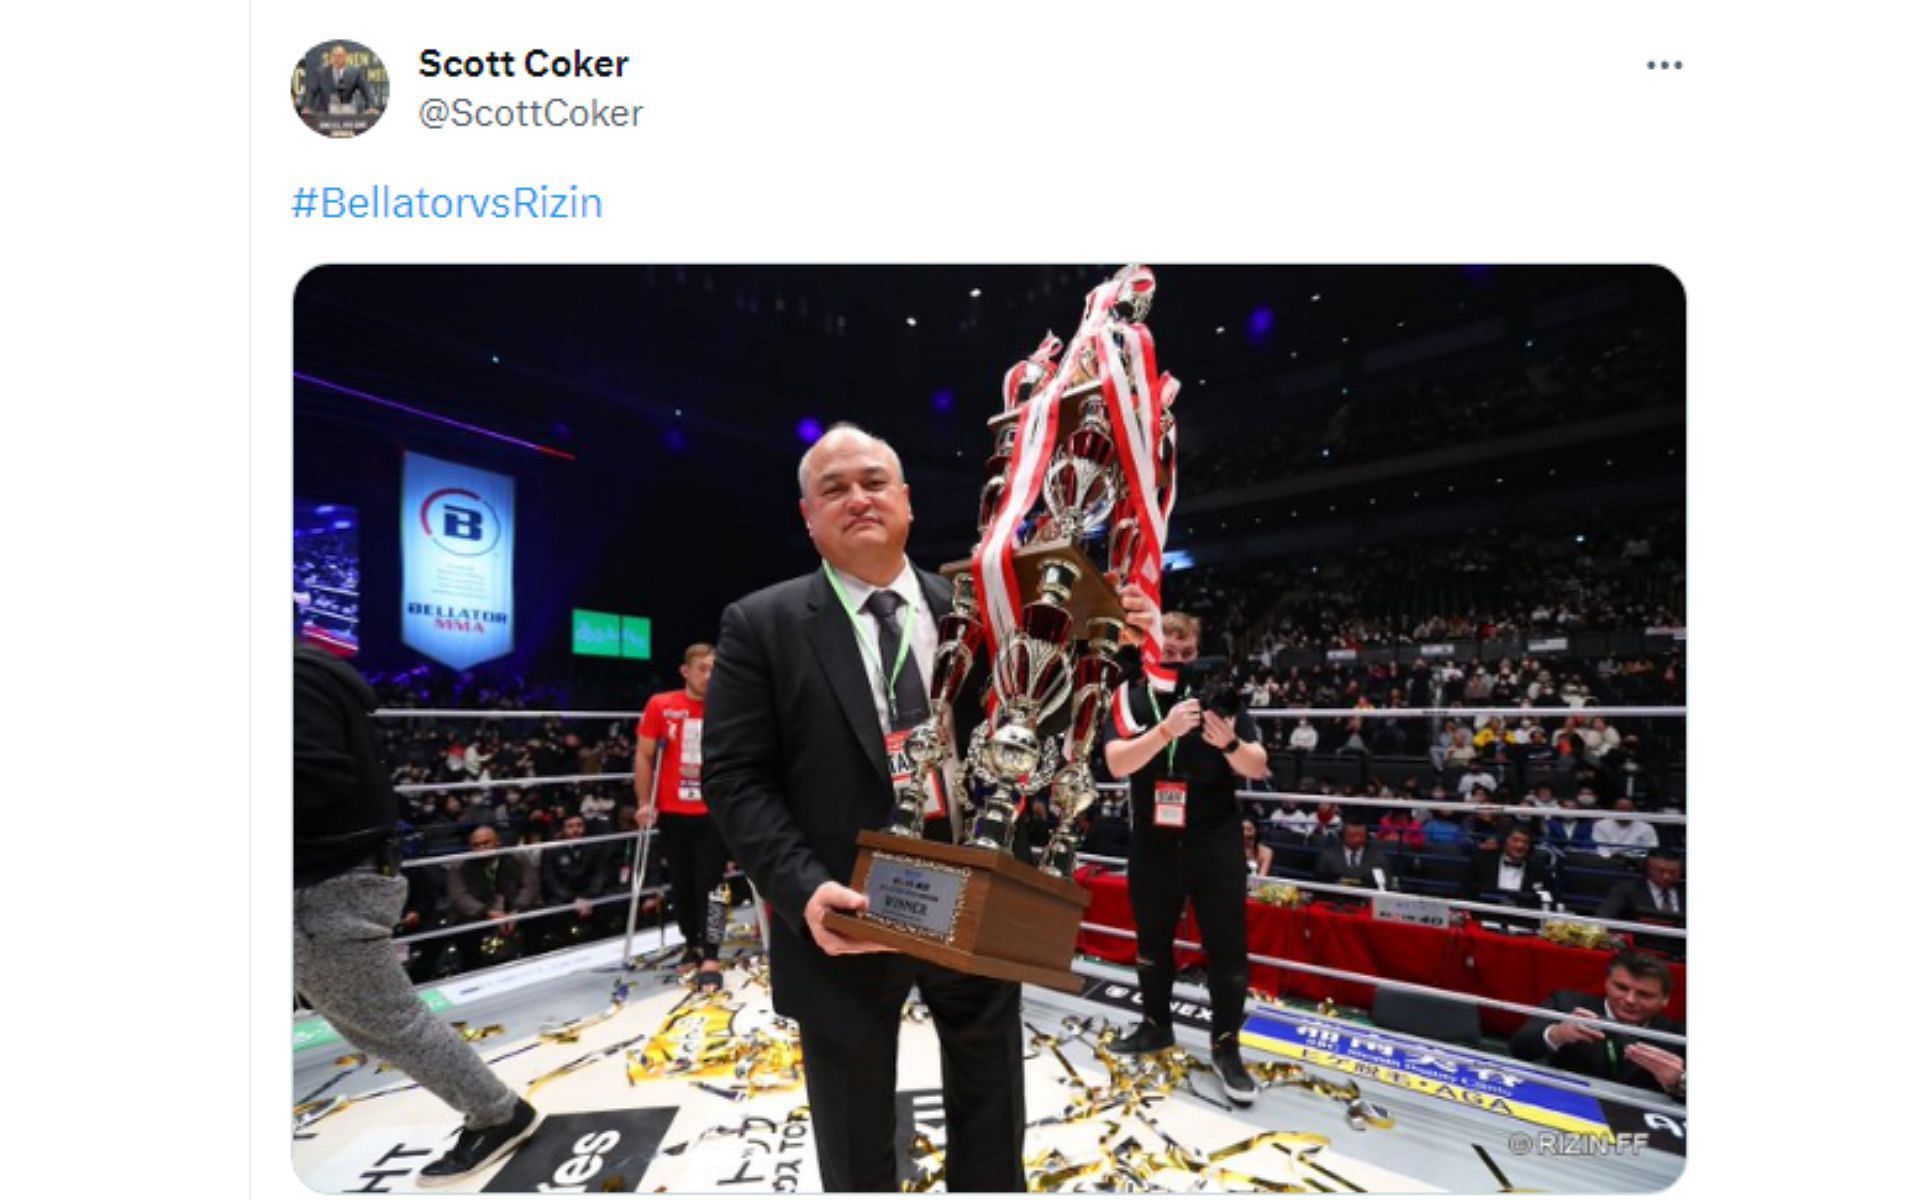 Tweet showing Scott Coker&#039;s success as a promoter [Image courtesy: RIZIN FF, and @ScottCoker - X]